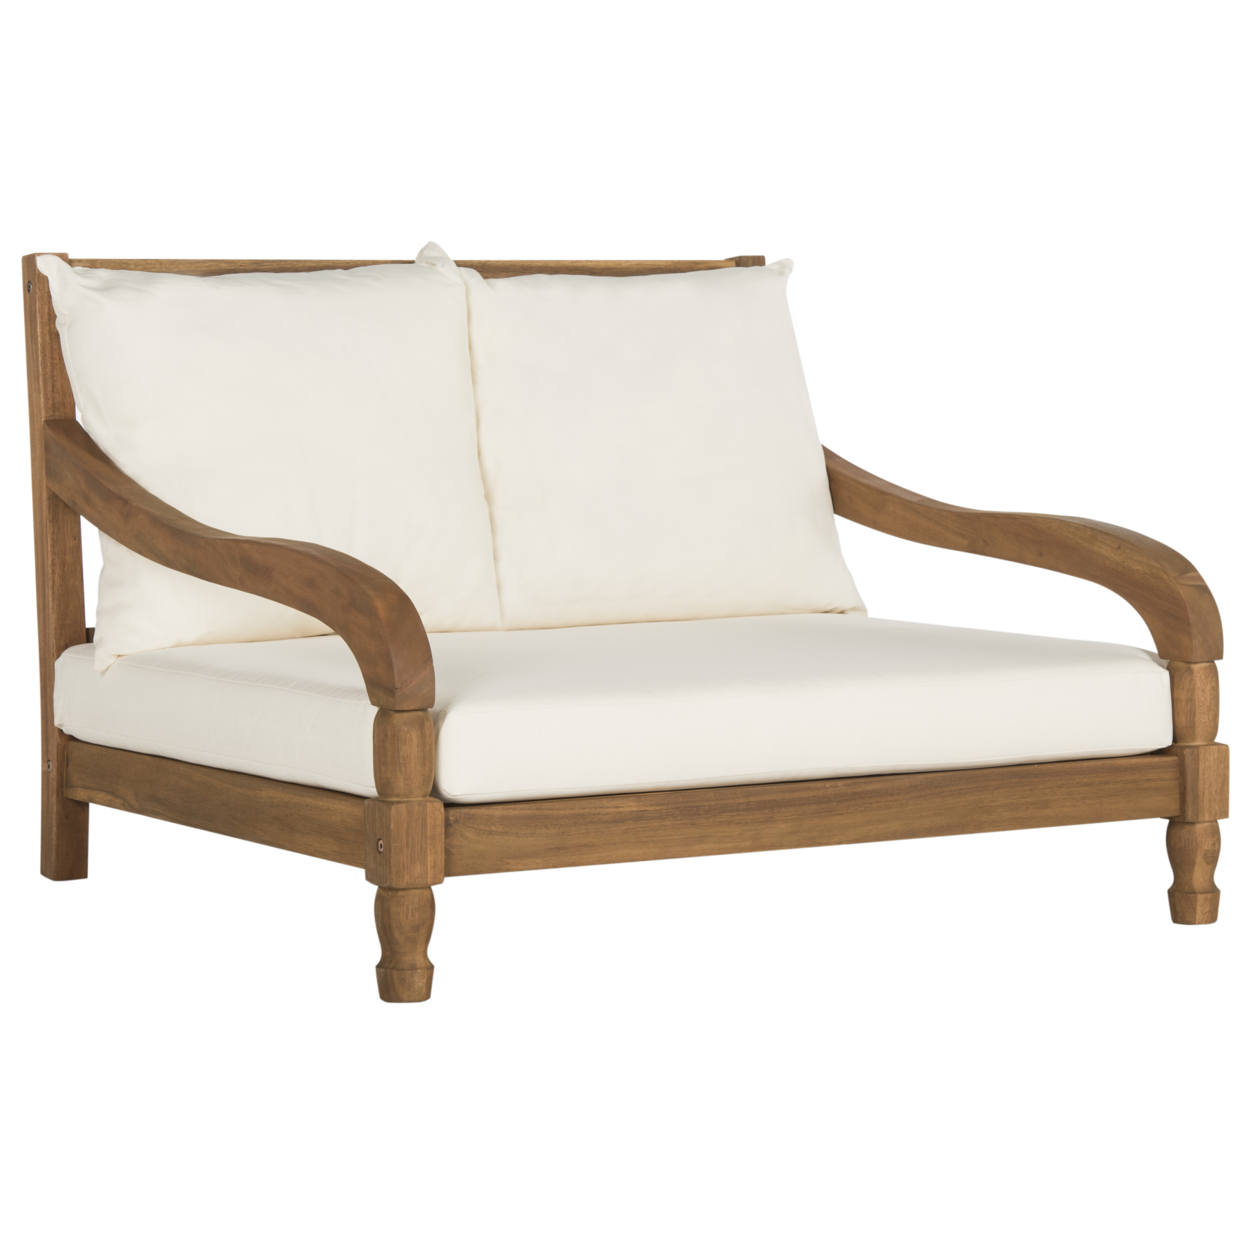 SAFAVIEH Outdoor Collection Pomona Lounger Natural/Beige